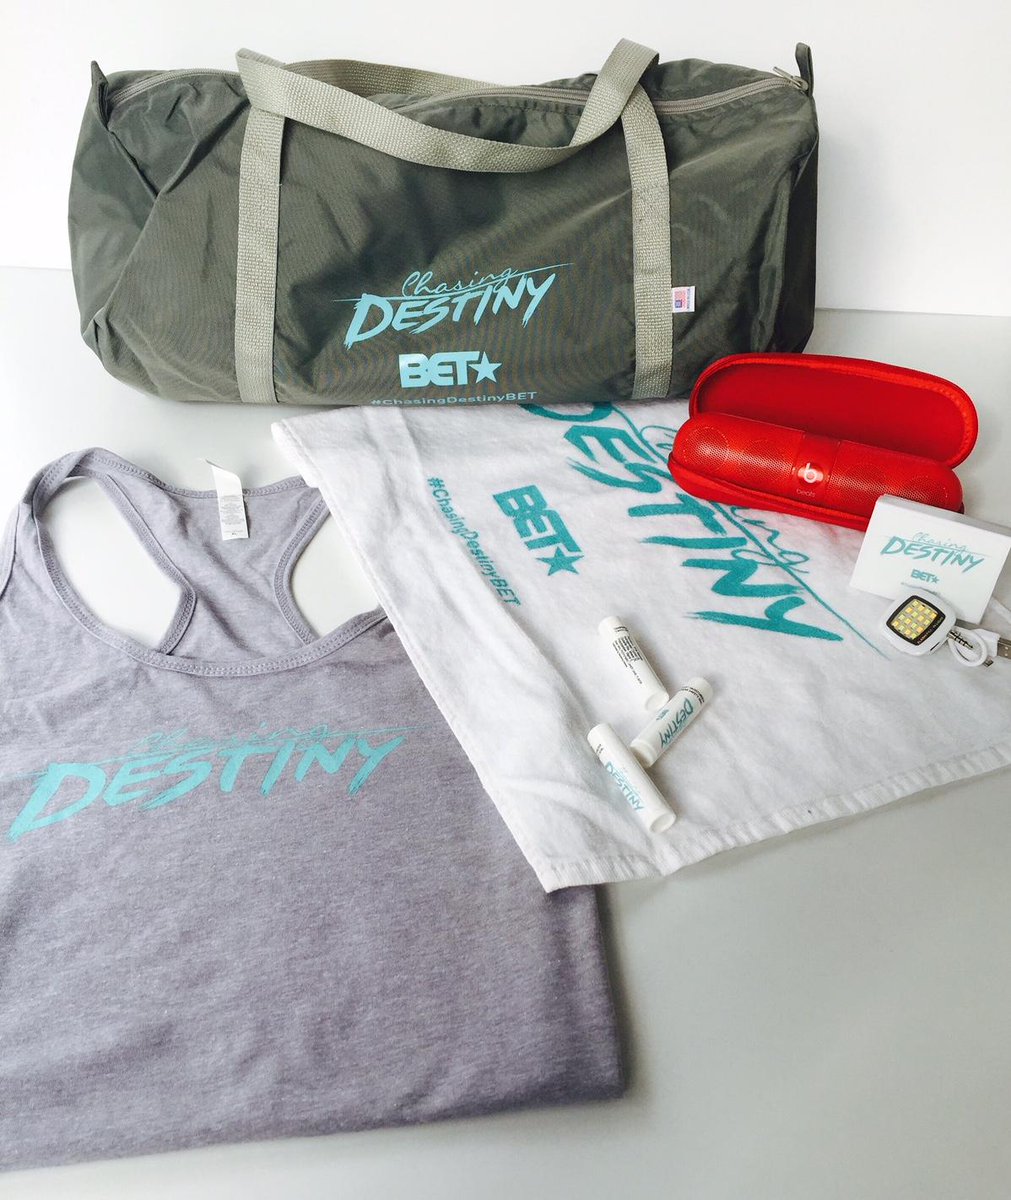 RT @BET: Want #ChasingDestinyBET swag? Go to https://t.co/c4188kg0zu for a chance to win! See rules: https://t.co/XVROyrQy9E https://t.co/3…